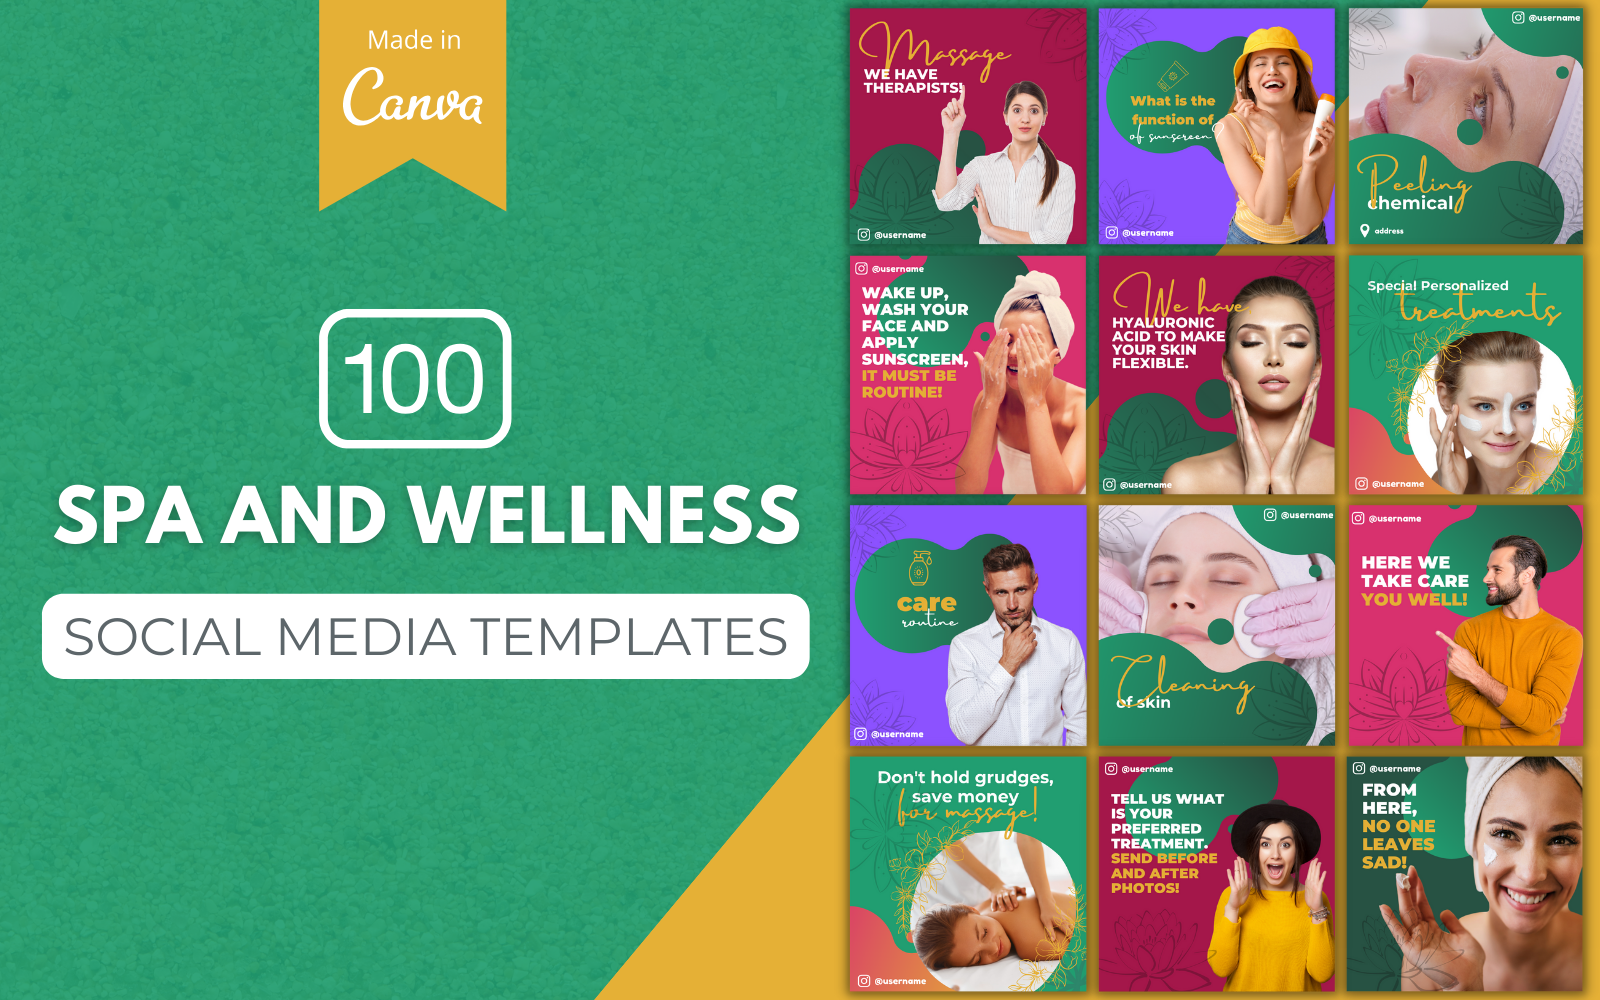 100 Spa and Wellness Canva Templates For Social Media